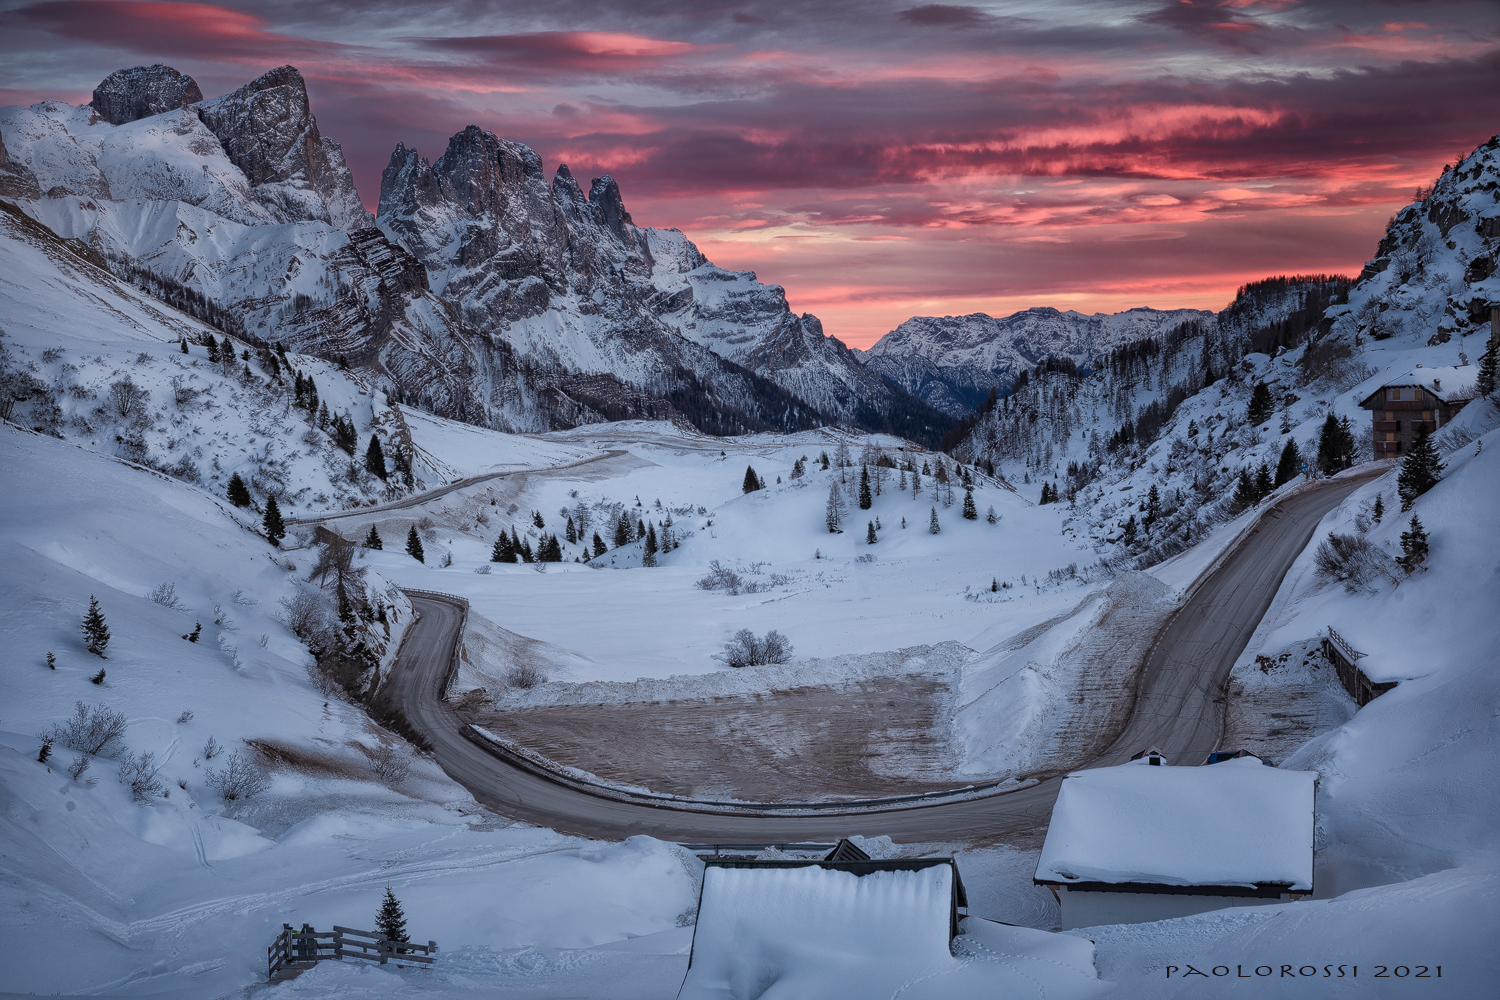 Sunset at Passo Rolle......